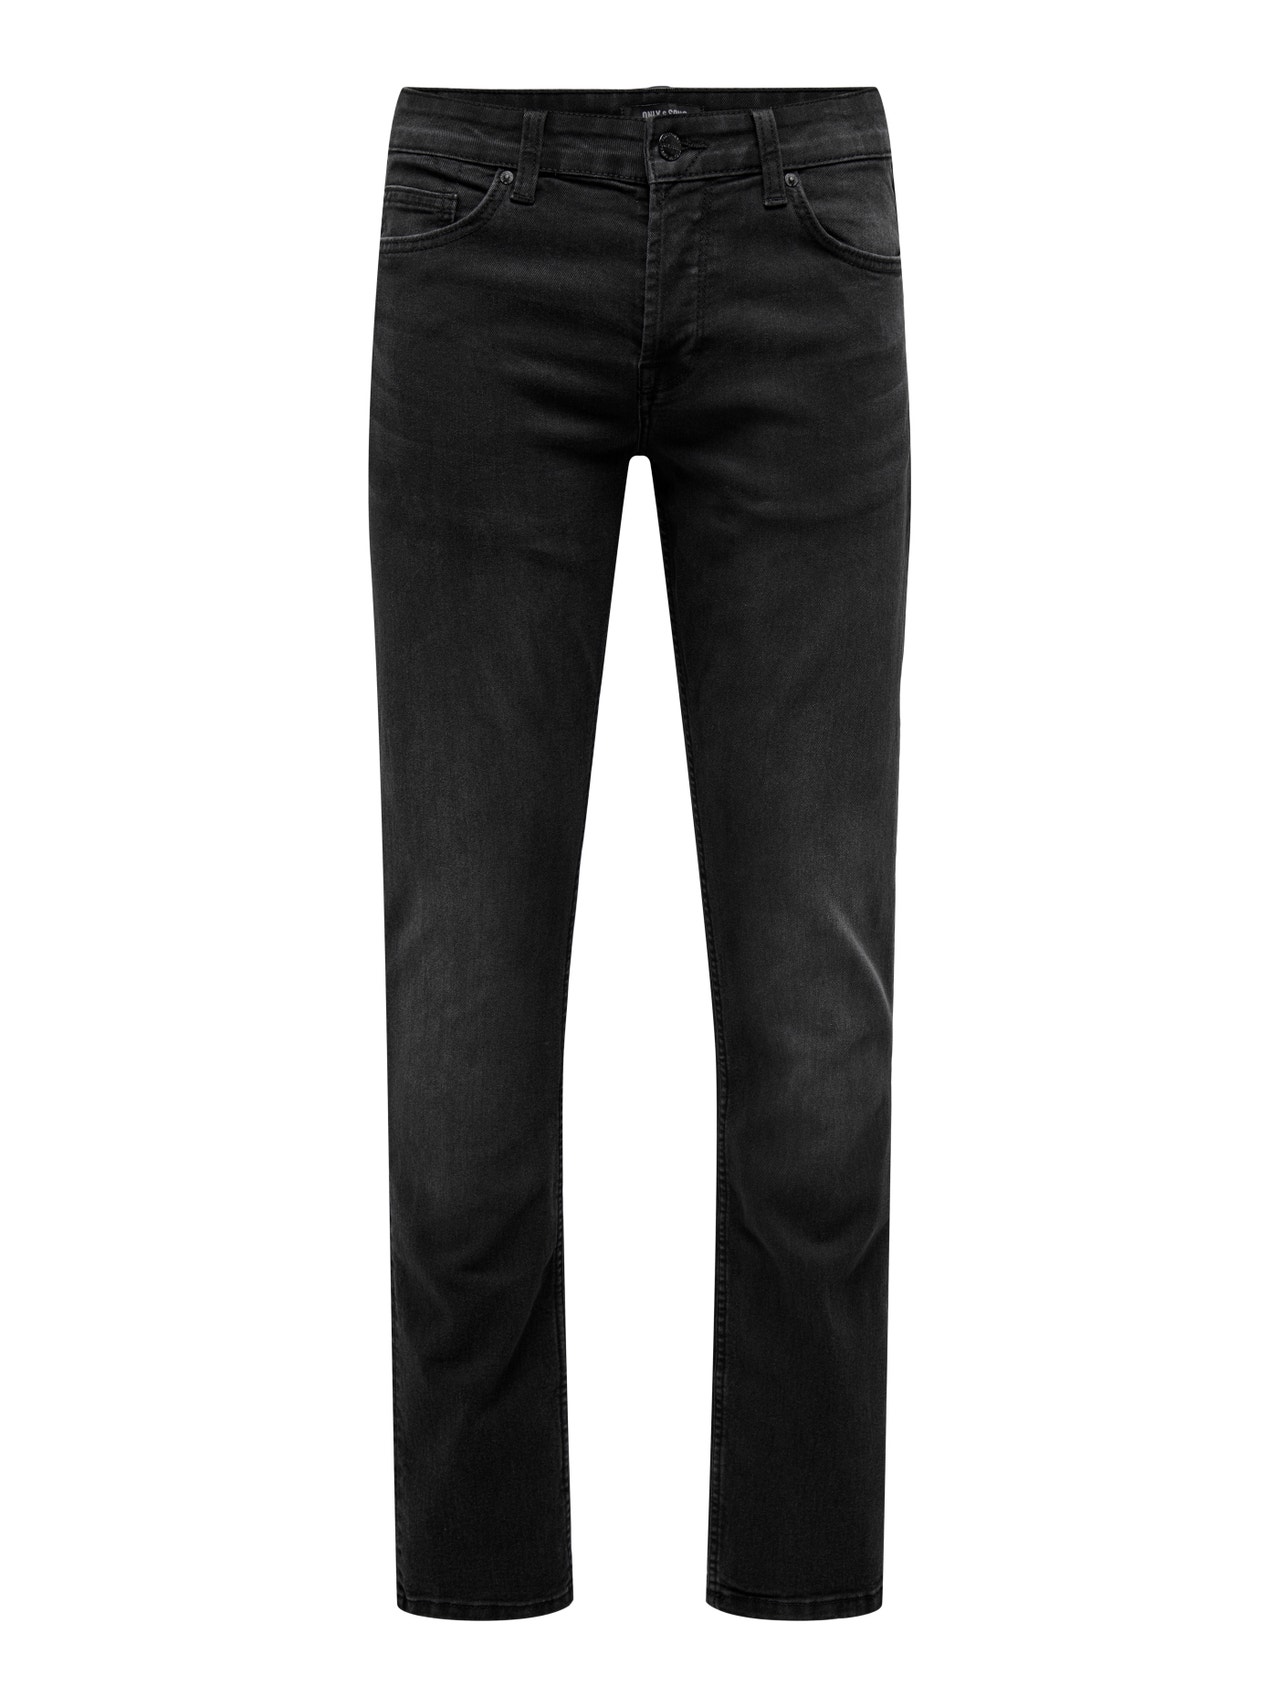 ONLY & SONS Jeans Slim Fit Taille classique -Washed Black - 22026619